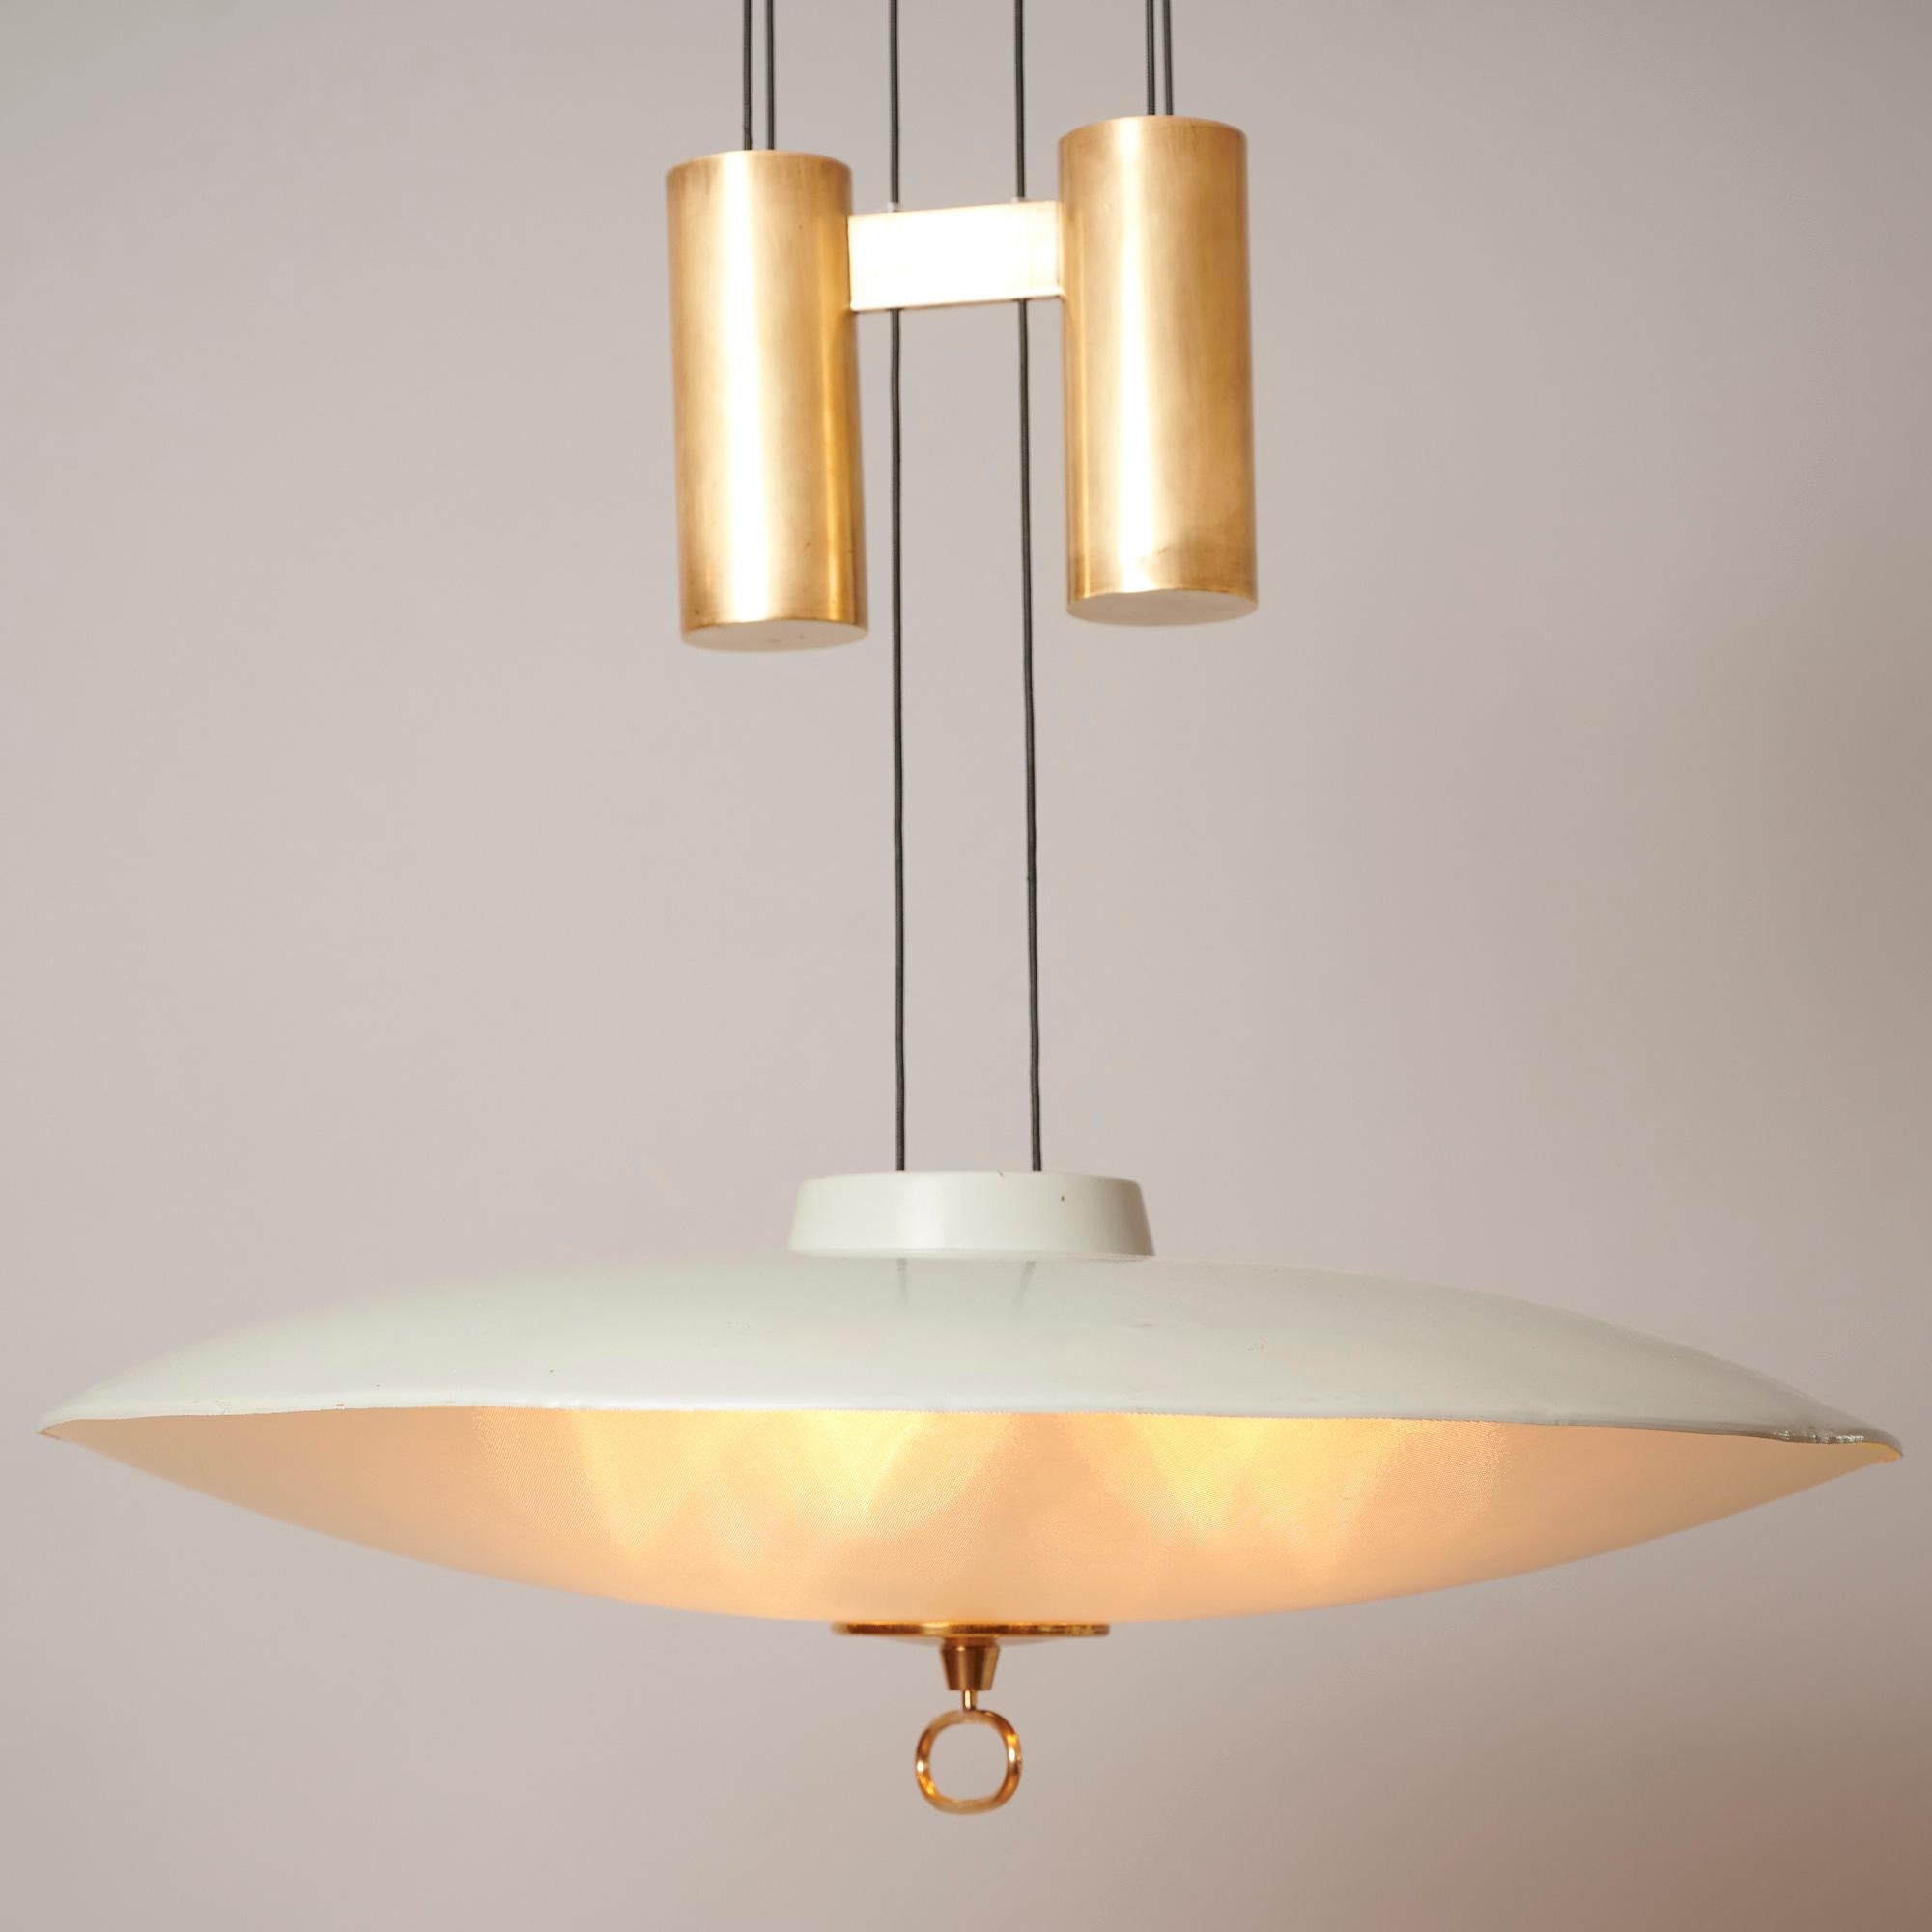 Italian Rare Counterbalance chandelier by Max Ingrand For Fontana Arte c1954 For Sale